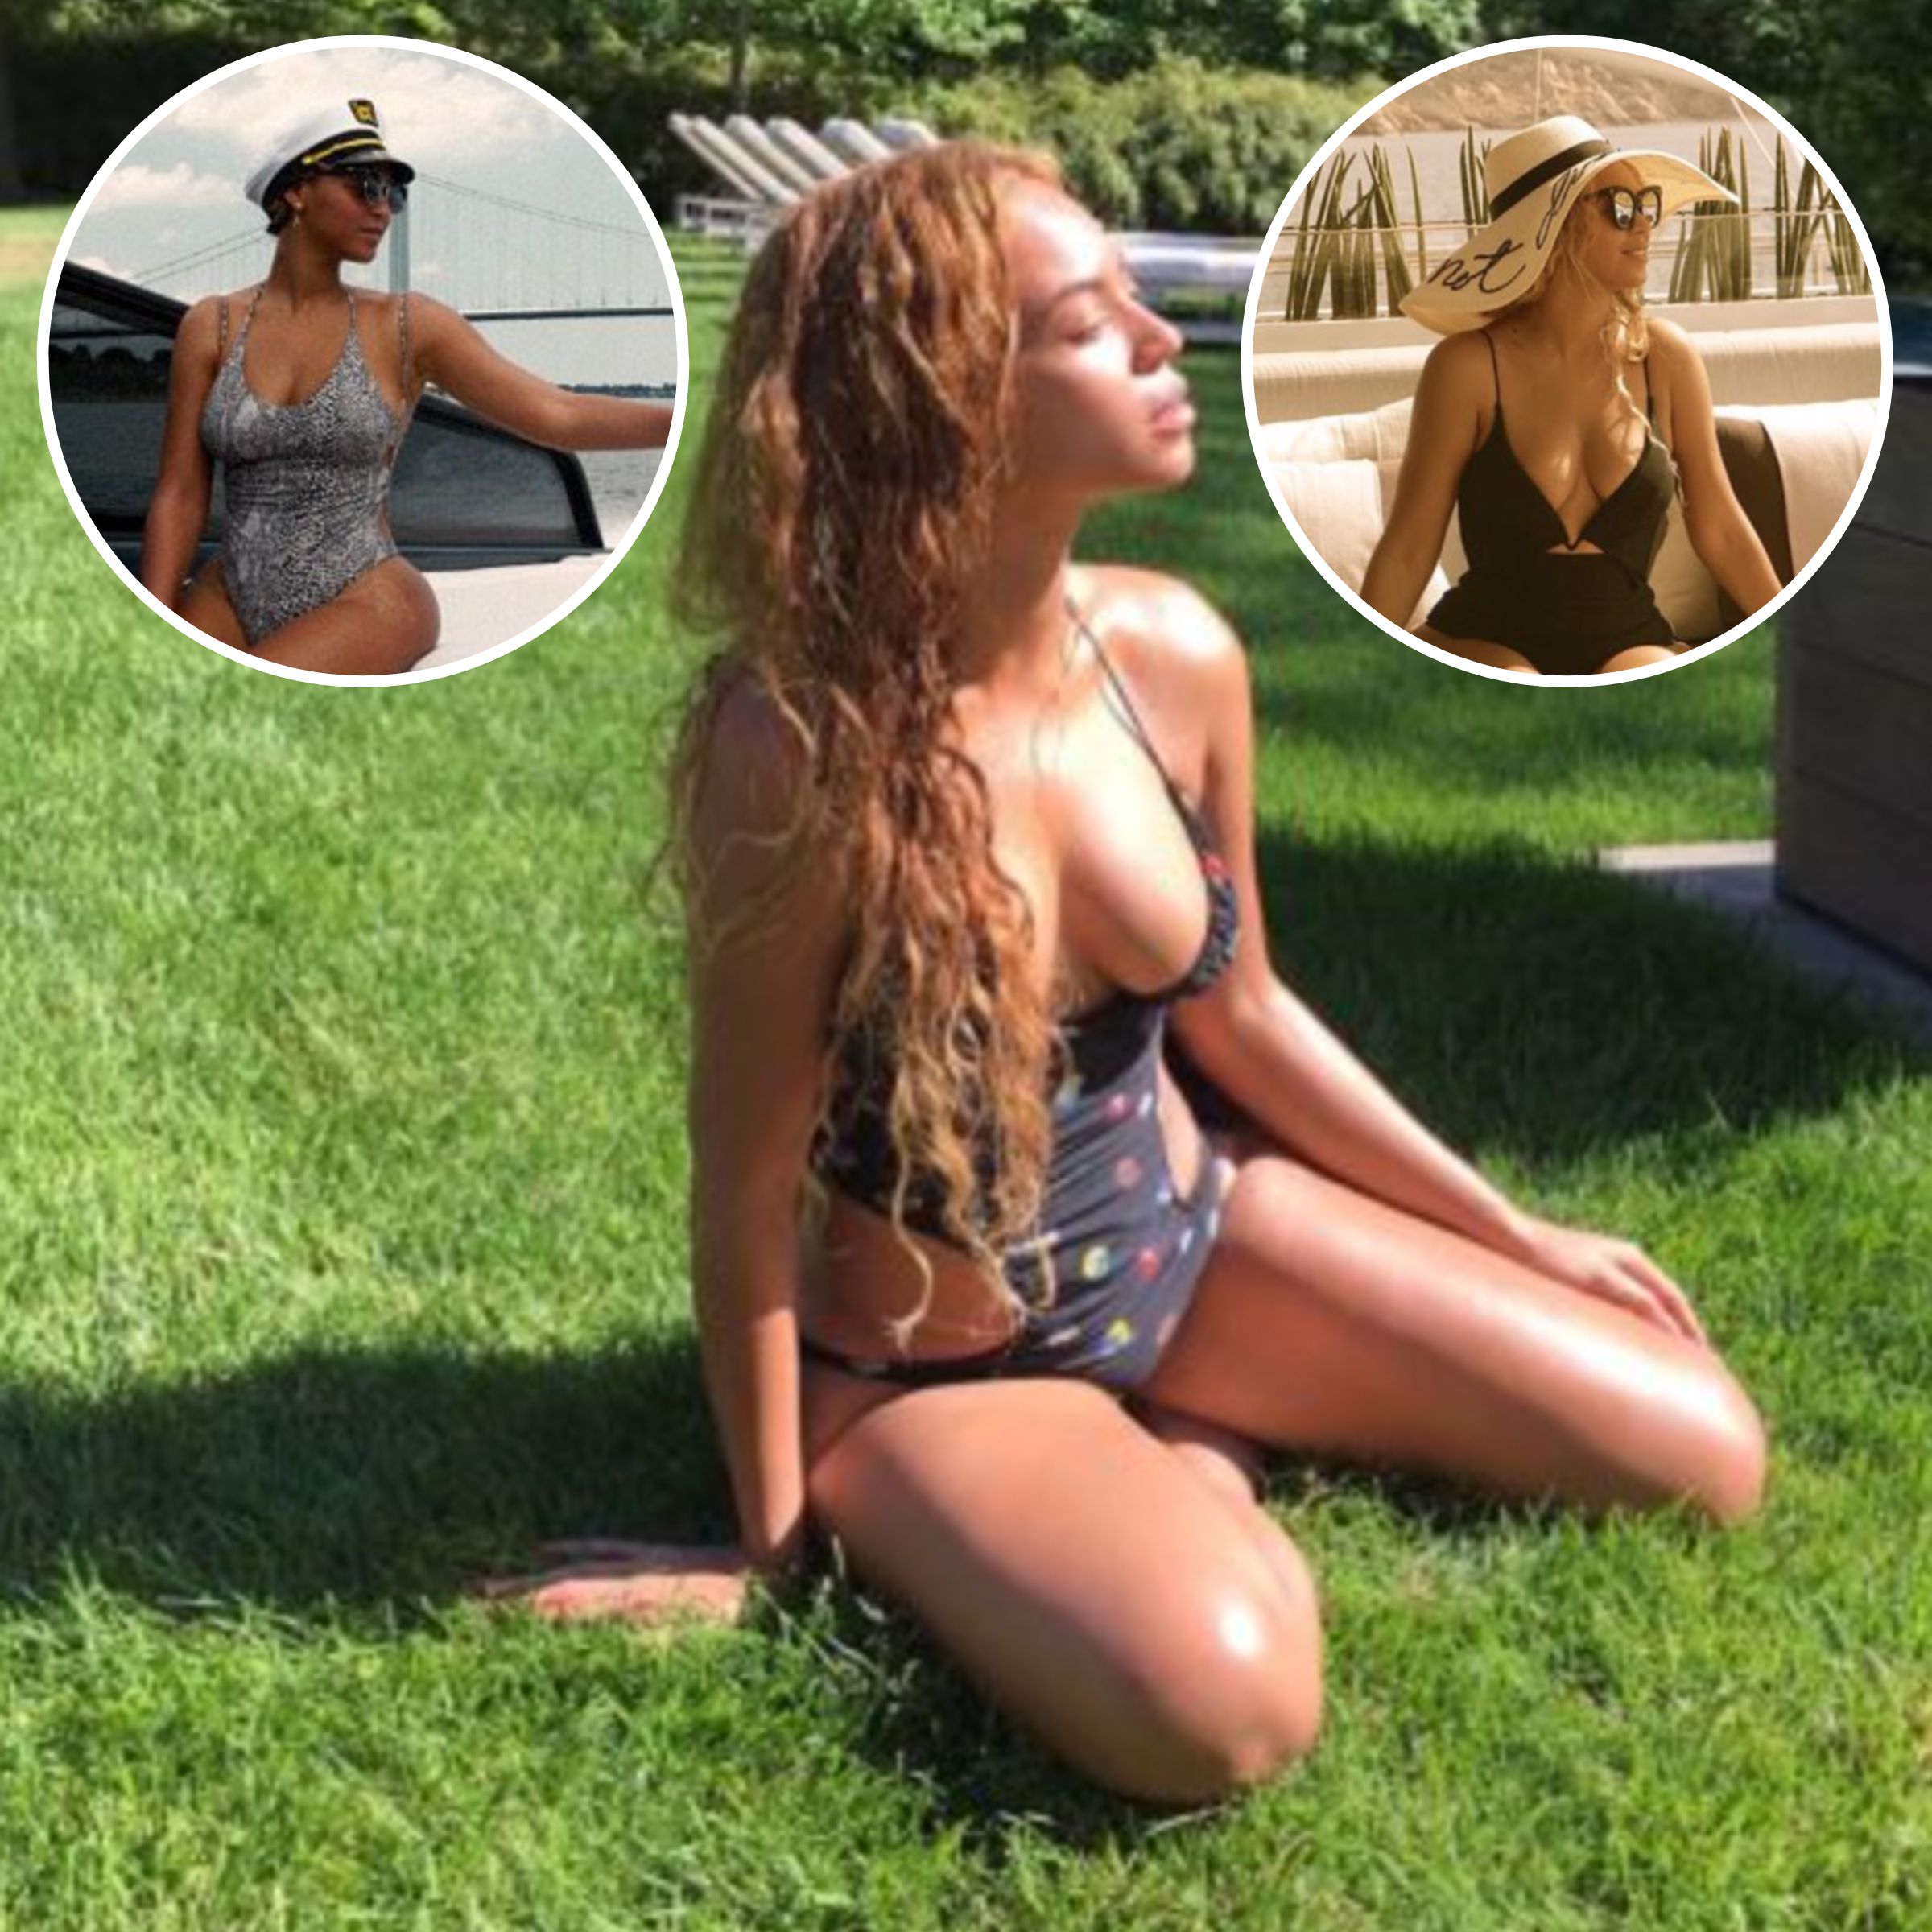 Texas Nude Beach Candids - Beyonce Bikini Photos: Her Sexiest Swimsuit Pictures